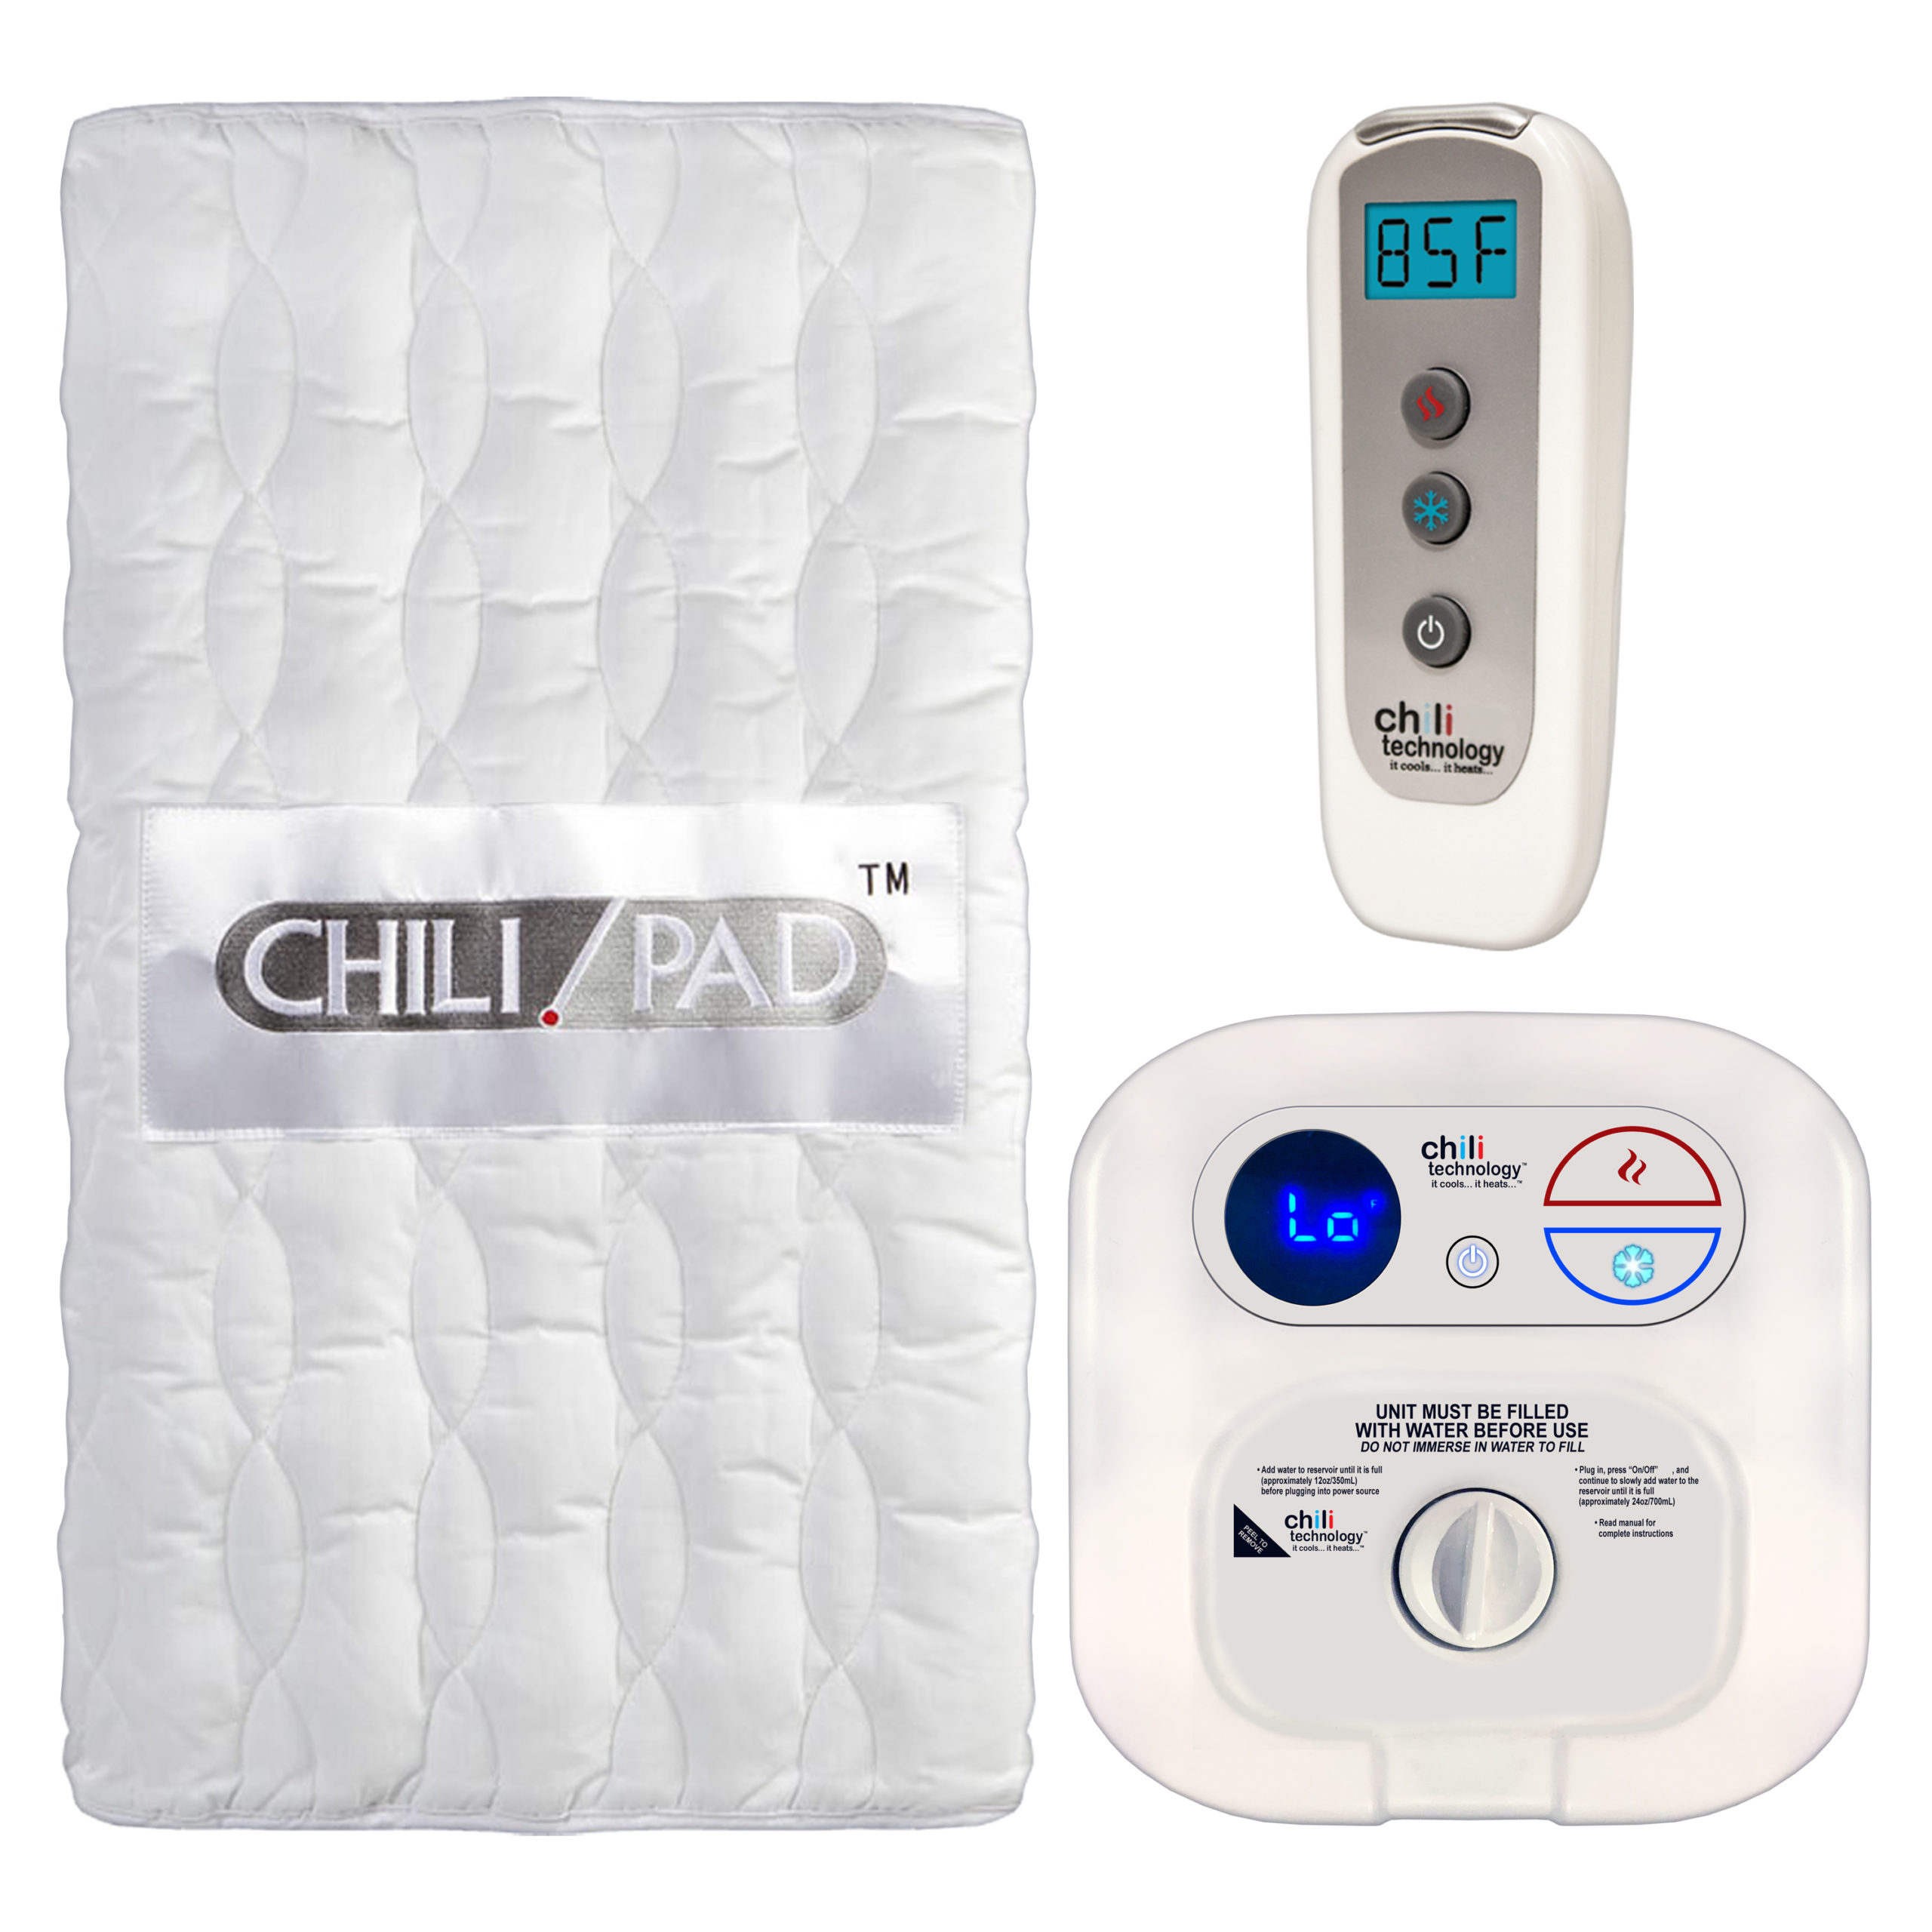 Is Hot Flashes a Sign of Pregnancy - Chilipad|Temperature|Mattress|Cube|Sleep|Bed|Water|System|Pad|Ooler|Control|Unit|Night|Bedjet|Technology|Side|Air|Product|Review|Body|Time|Degrees|Noise|Price|Pod|Tubes|Heat|Device|Cooling|Room|King|App|Features|Size|Cover|Sleepers|Sheets|Energy|Warranty|Quality|Mattress Pad|Control Unit|Cube Sleep System|Sleep Pod|Distilled Water|Remote Control|Sleep System|Desired Temperature|Water Tank|Chilipad Cube|Chili Technology|Deep Sleep|Pro Cover|Ooler Sleep System|Hydrogen Peroxide|Cool Mesh|Sleep Temperature|Fitted Sheet|Pod Pro|Sleep Quality|Smartphone App|Sleep Systems|Chilipad Sleep System|New Mattress|Sleep Trial|Full Refund|Mattress Topper|Body Heat|Air Flow|Chilipad Review